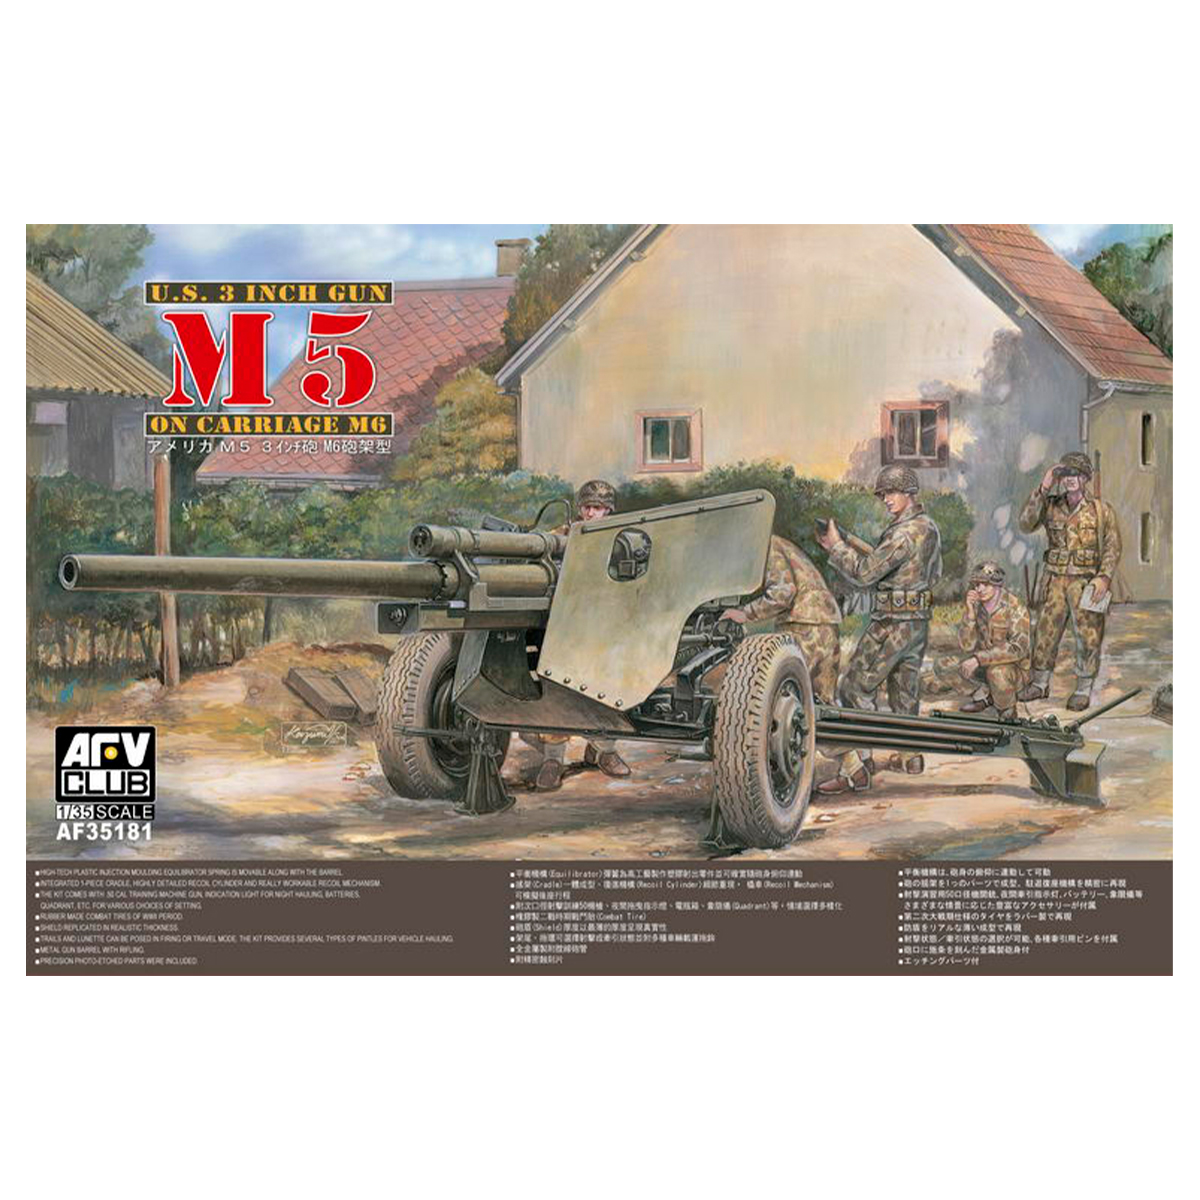 3 INCH GUN M5 AND CARRIAGE M6 1/35